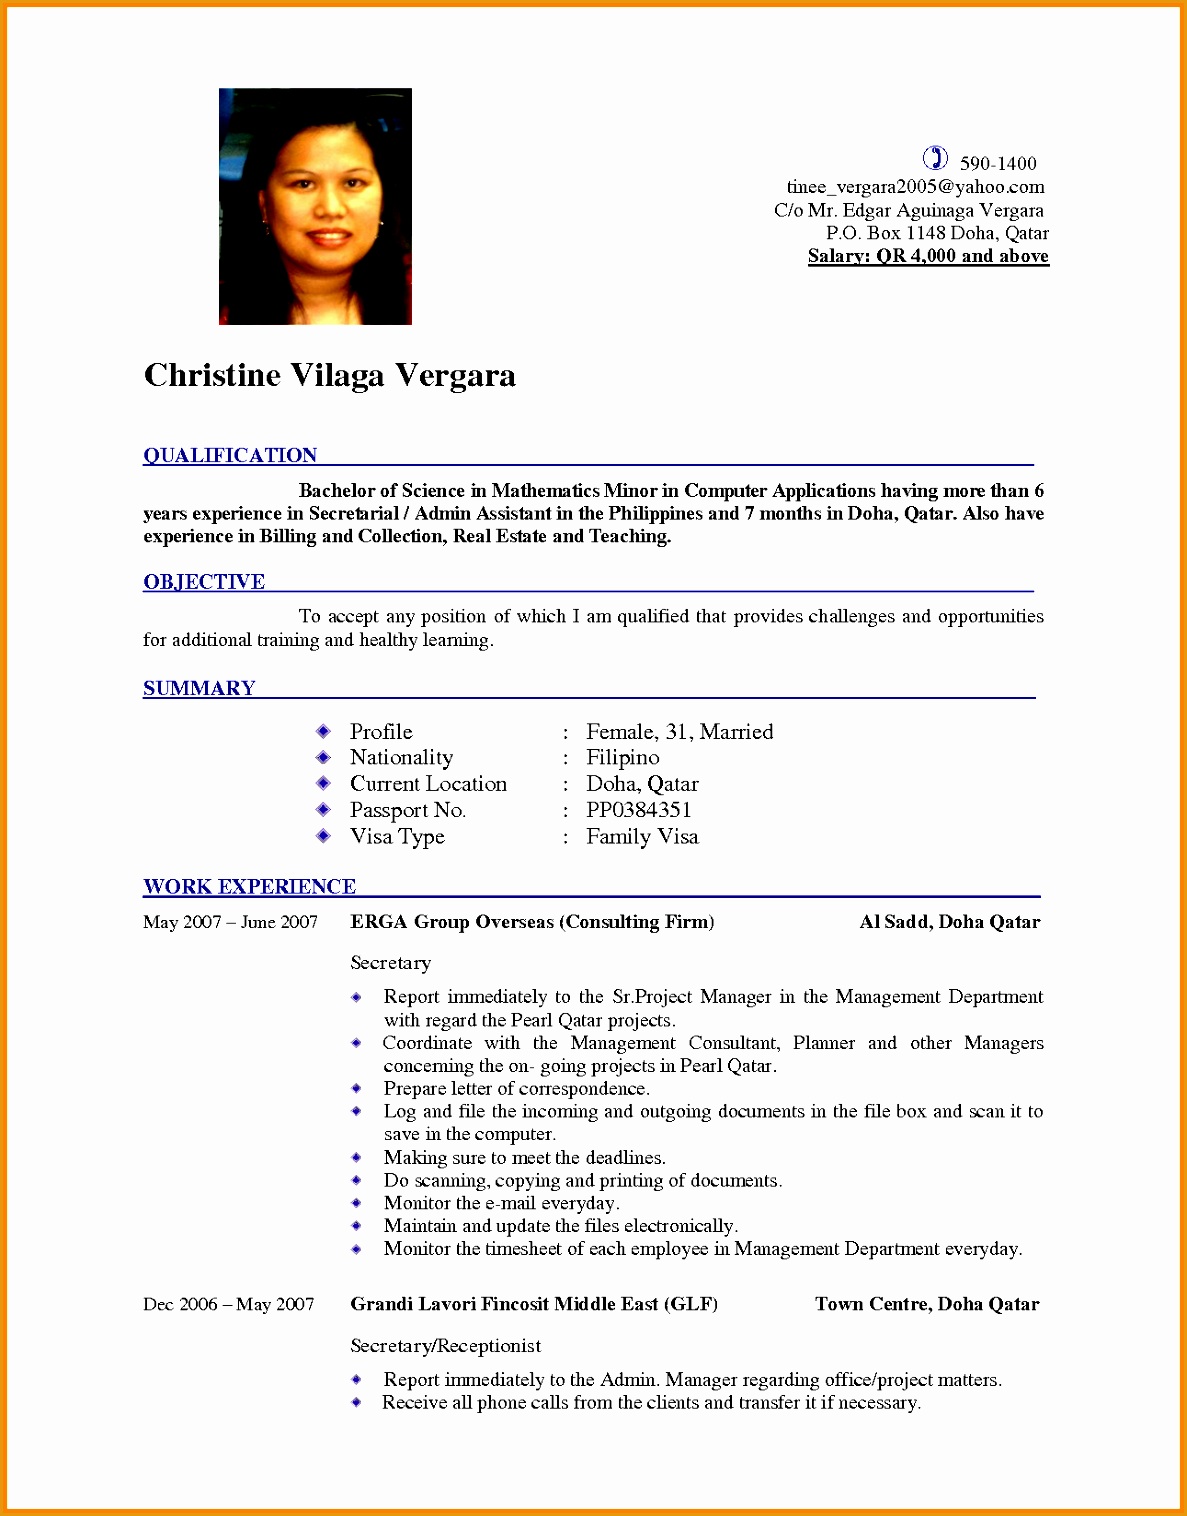 latest updated resume format15161187